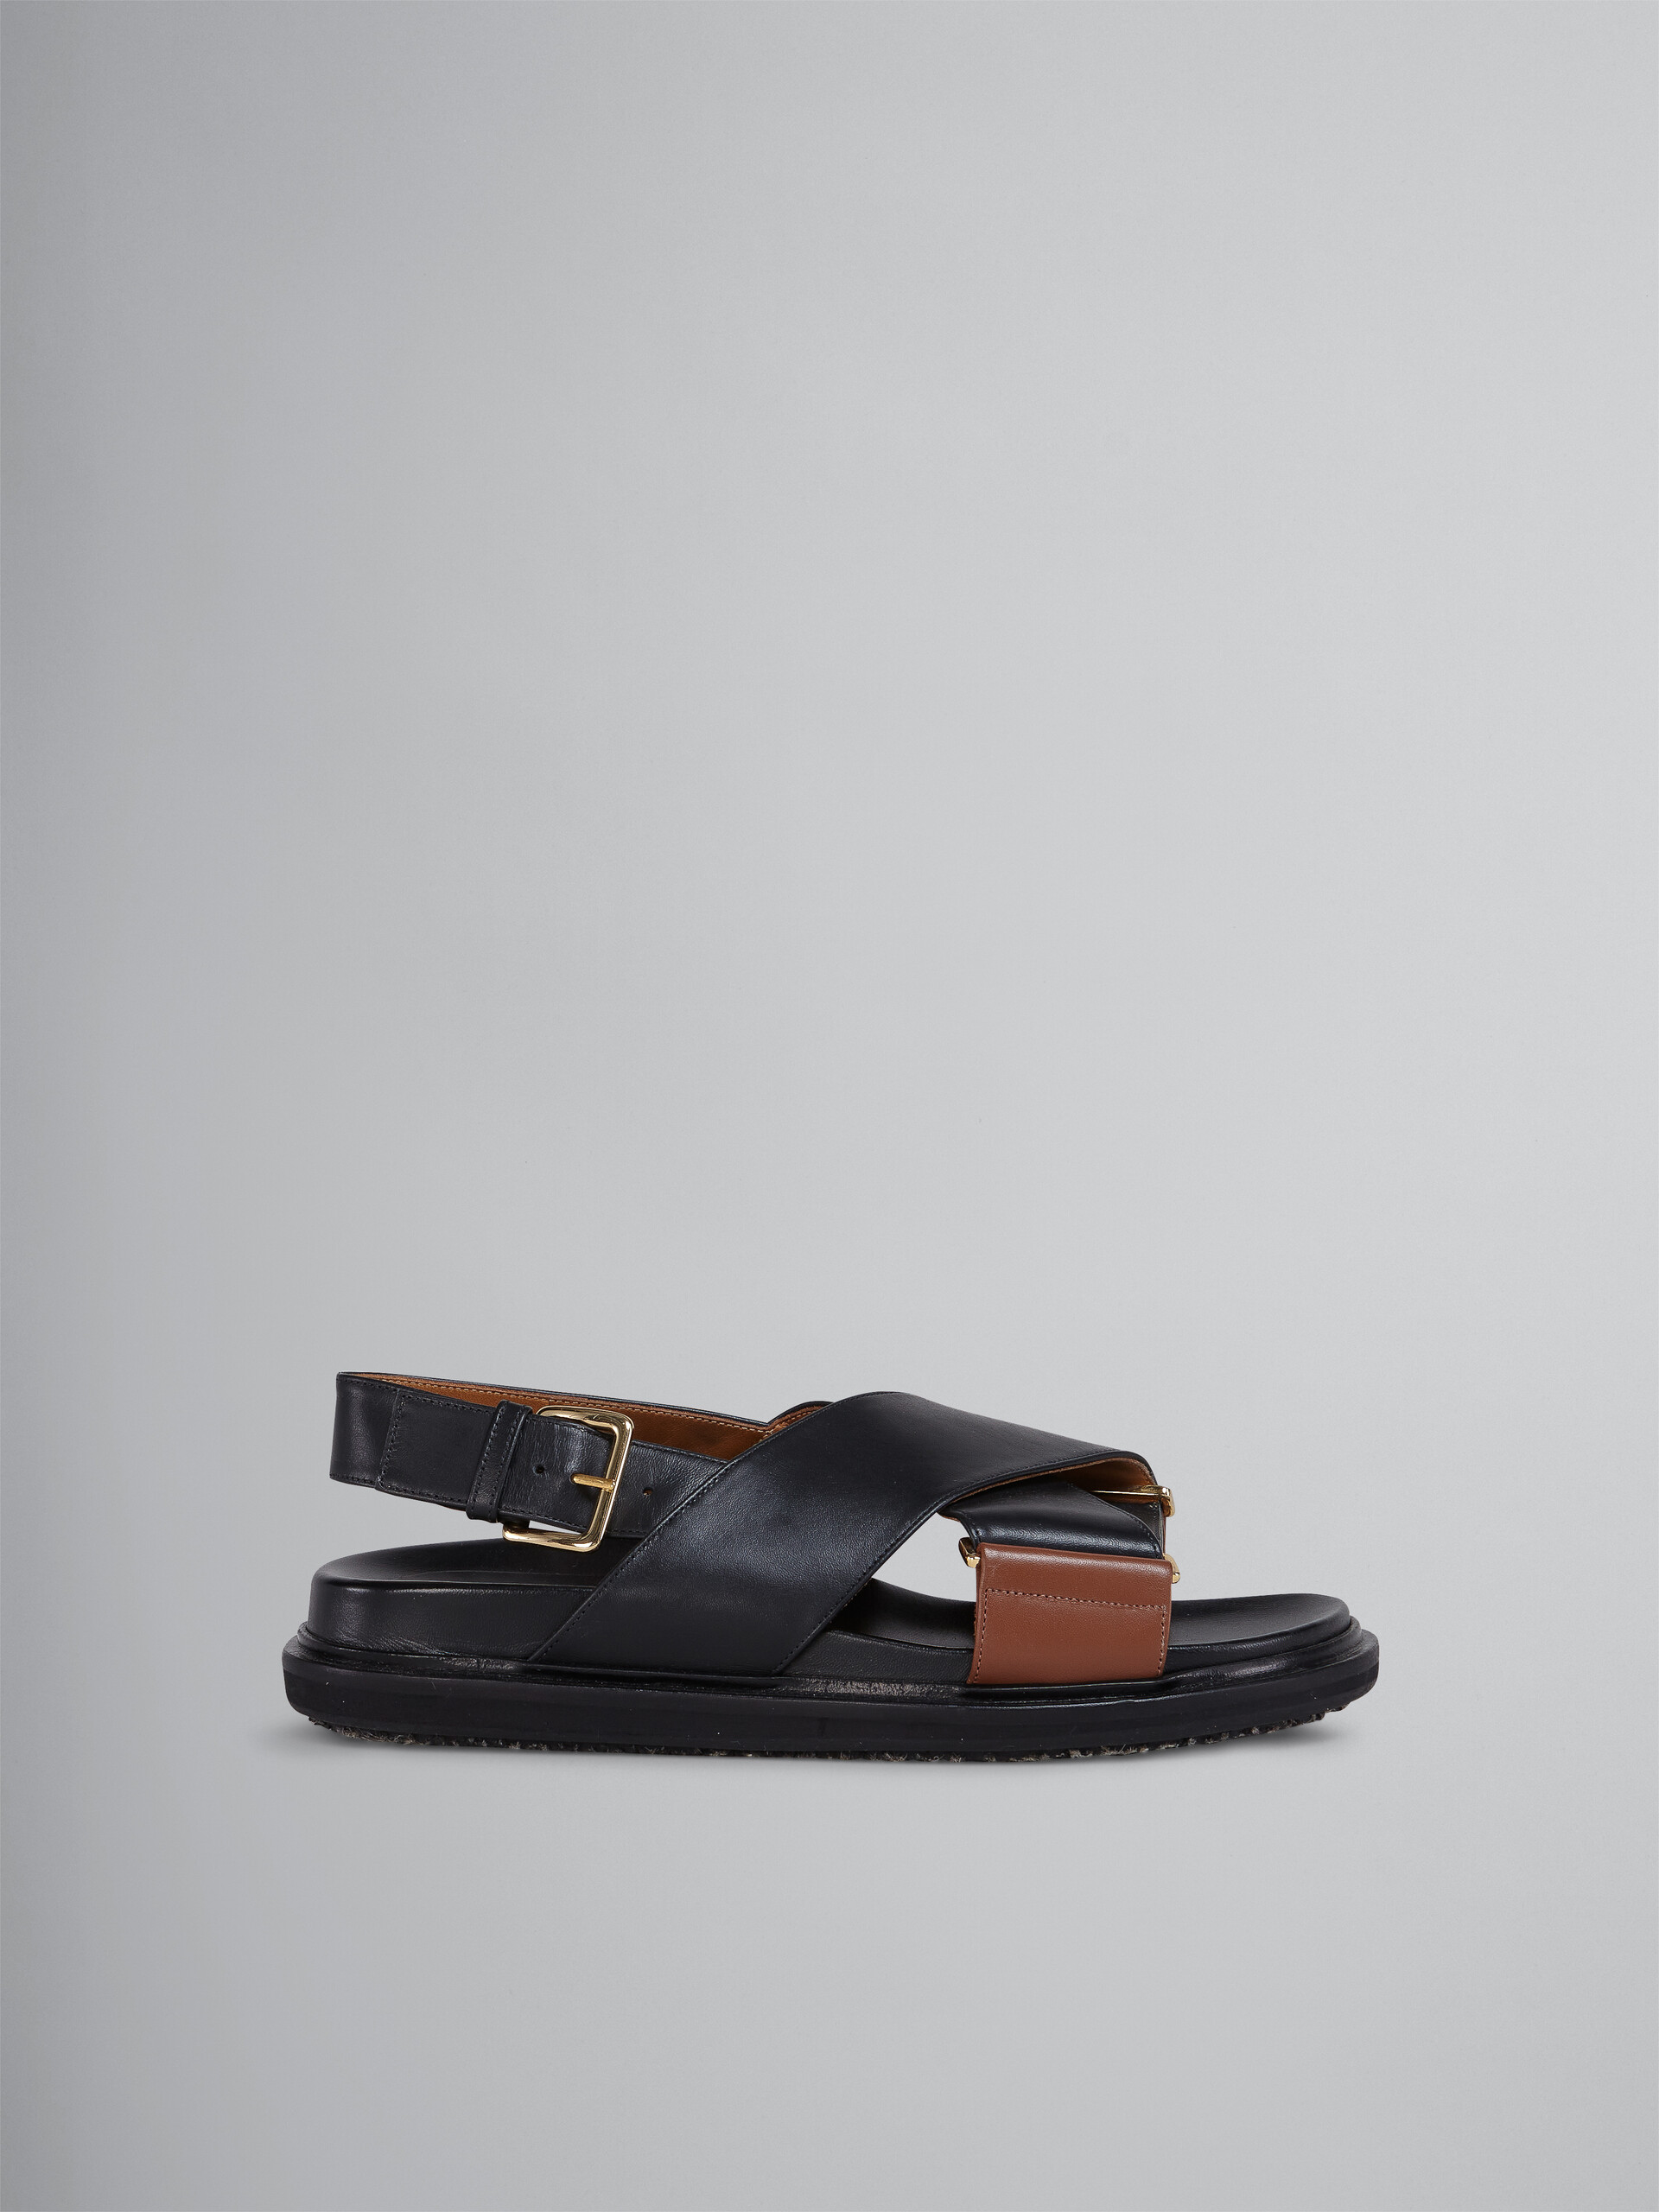 Black and brown smooth calf leather fussbett - Sandals - Image 1